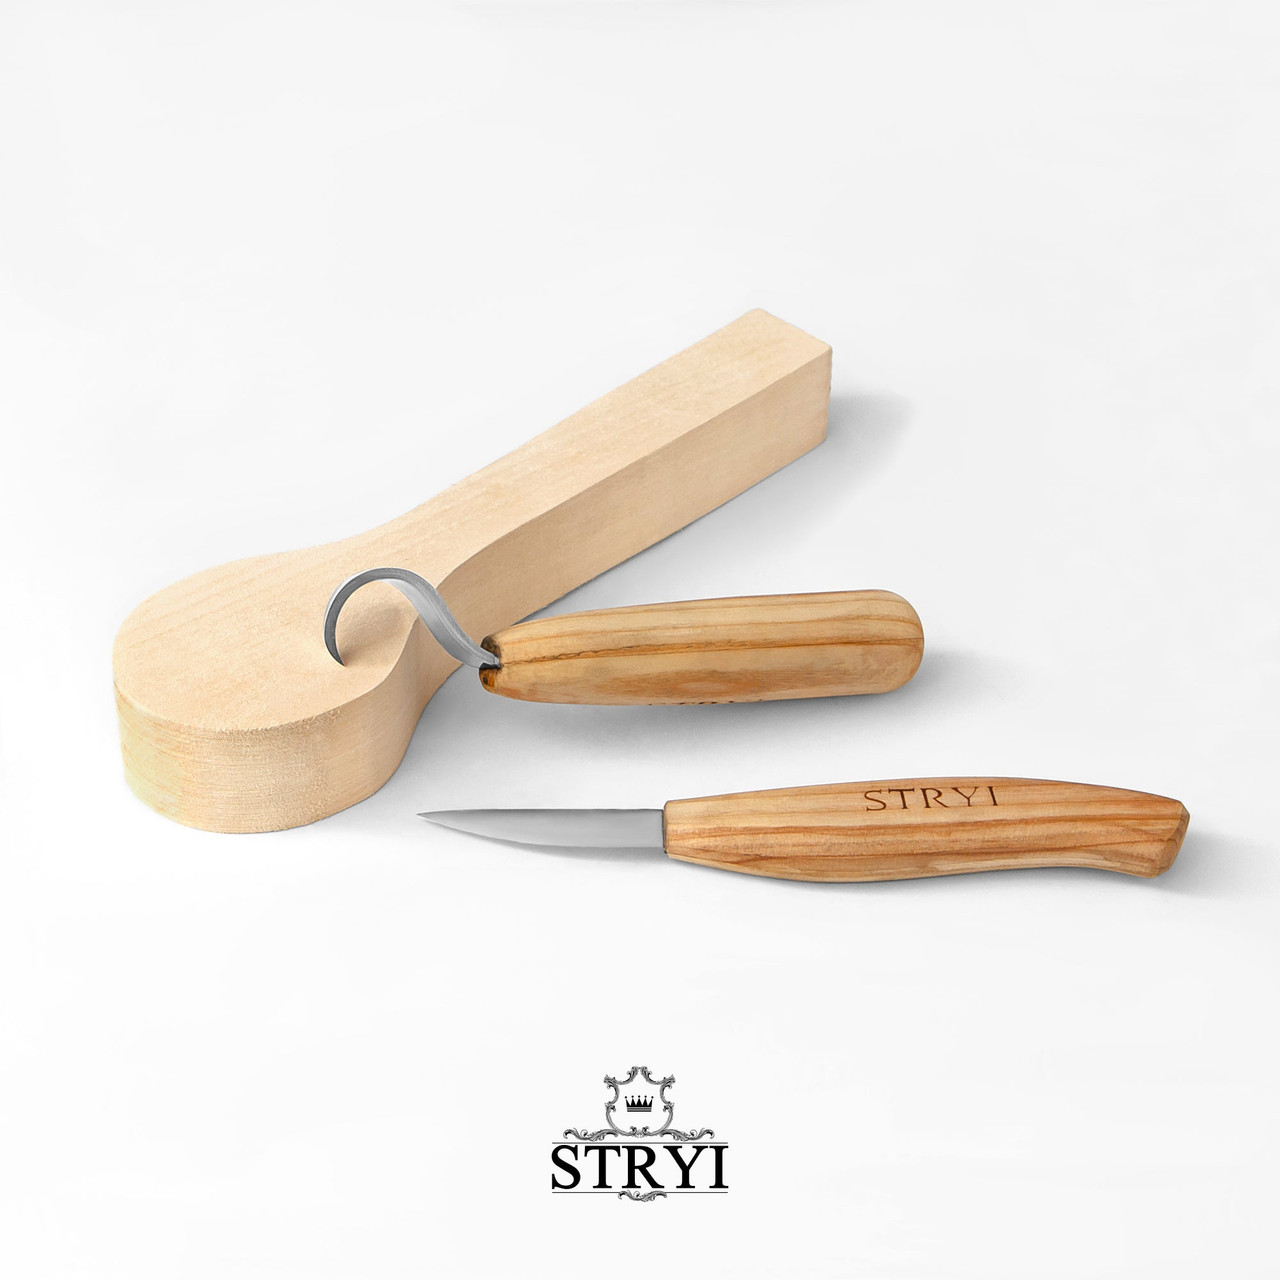 Beavercraft Spoon Carving Kit - My first attempts at Spoon Carving Tool  Review 